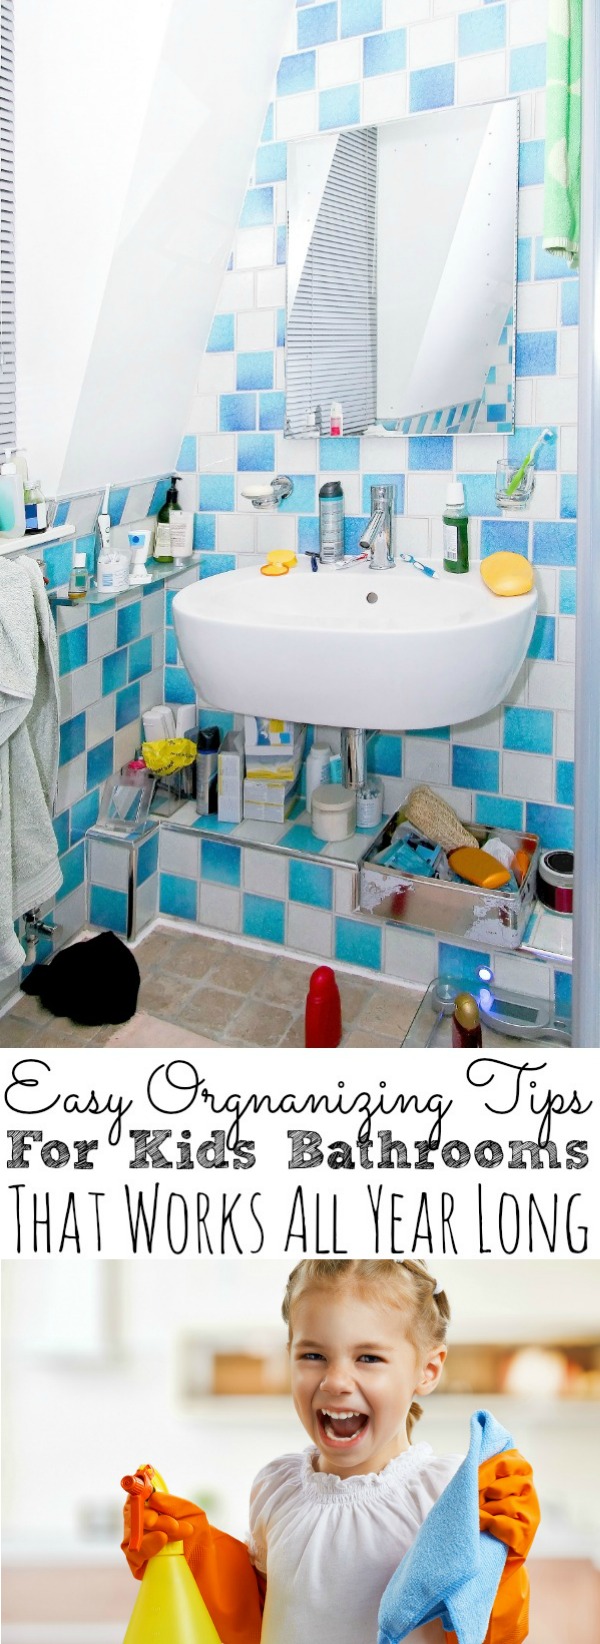 https://simplytodaylife.com/wp-content/uploads/2016/01/How-To-Keep-The-Kids-Bathroom-Organized.jpg